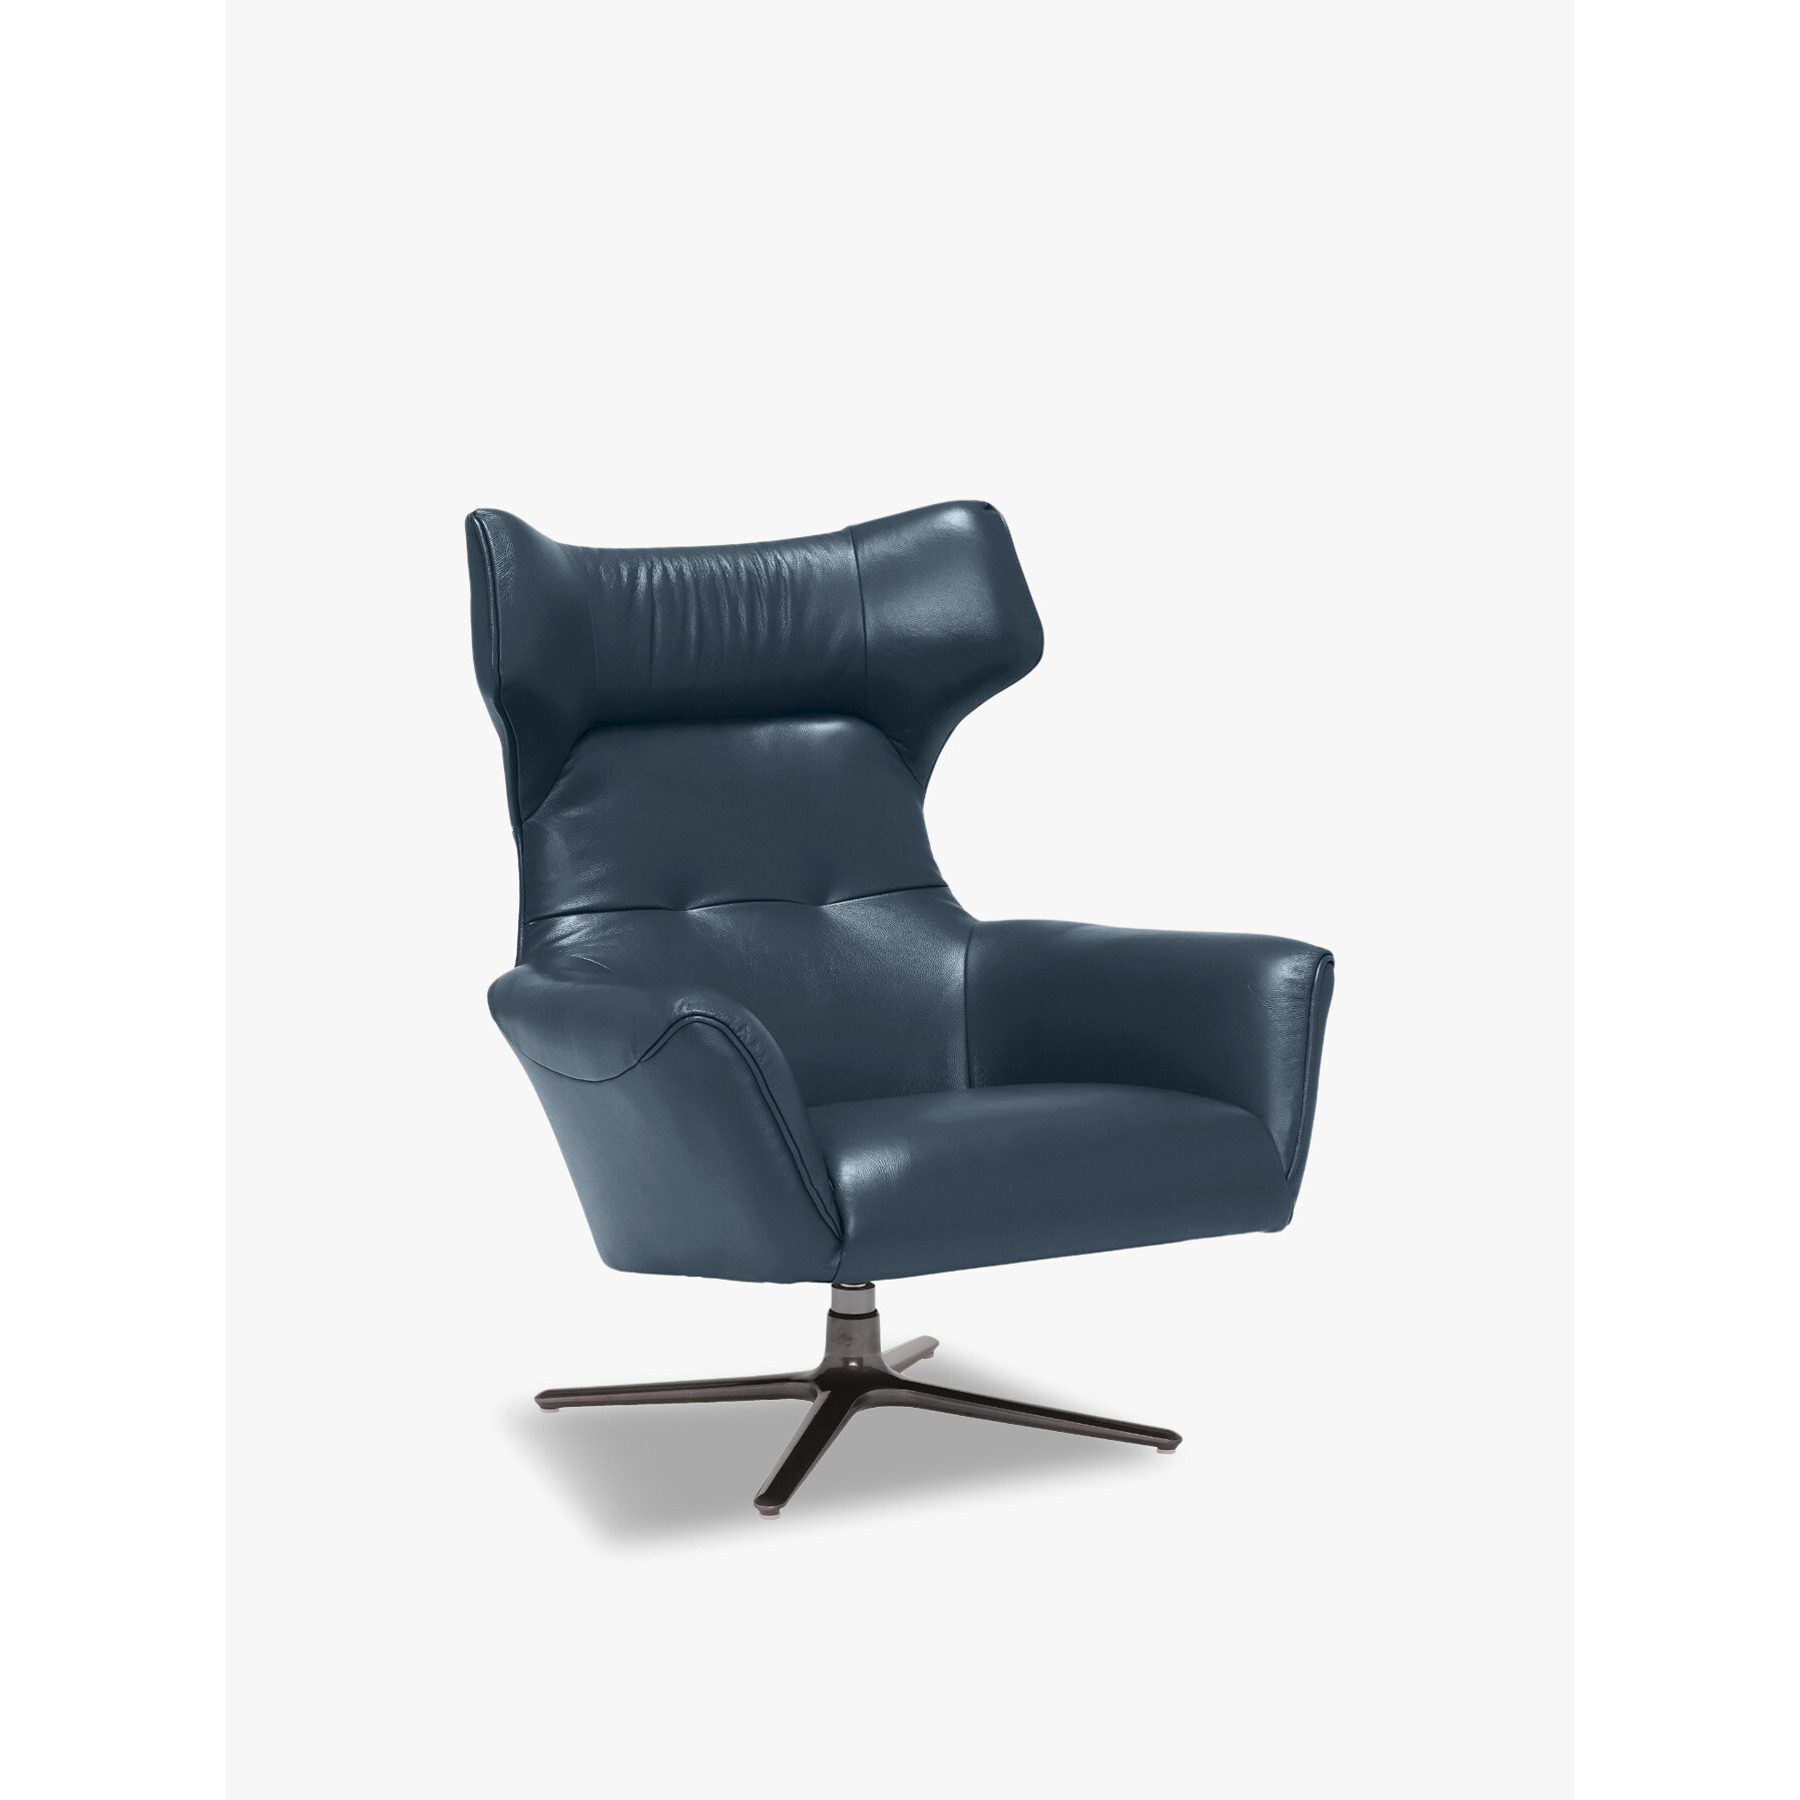 Barker and Stonehouse Jax Swivel Chair, Melbourne Navy Blue - image 1